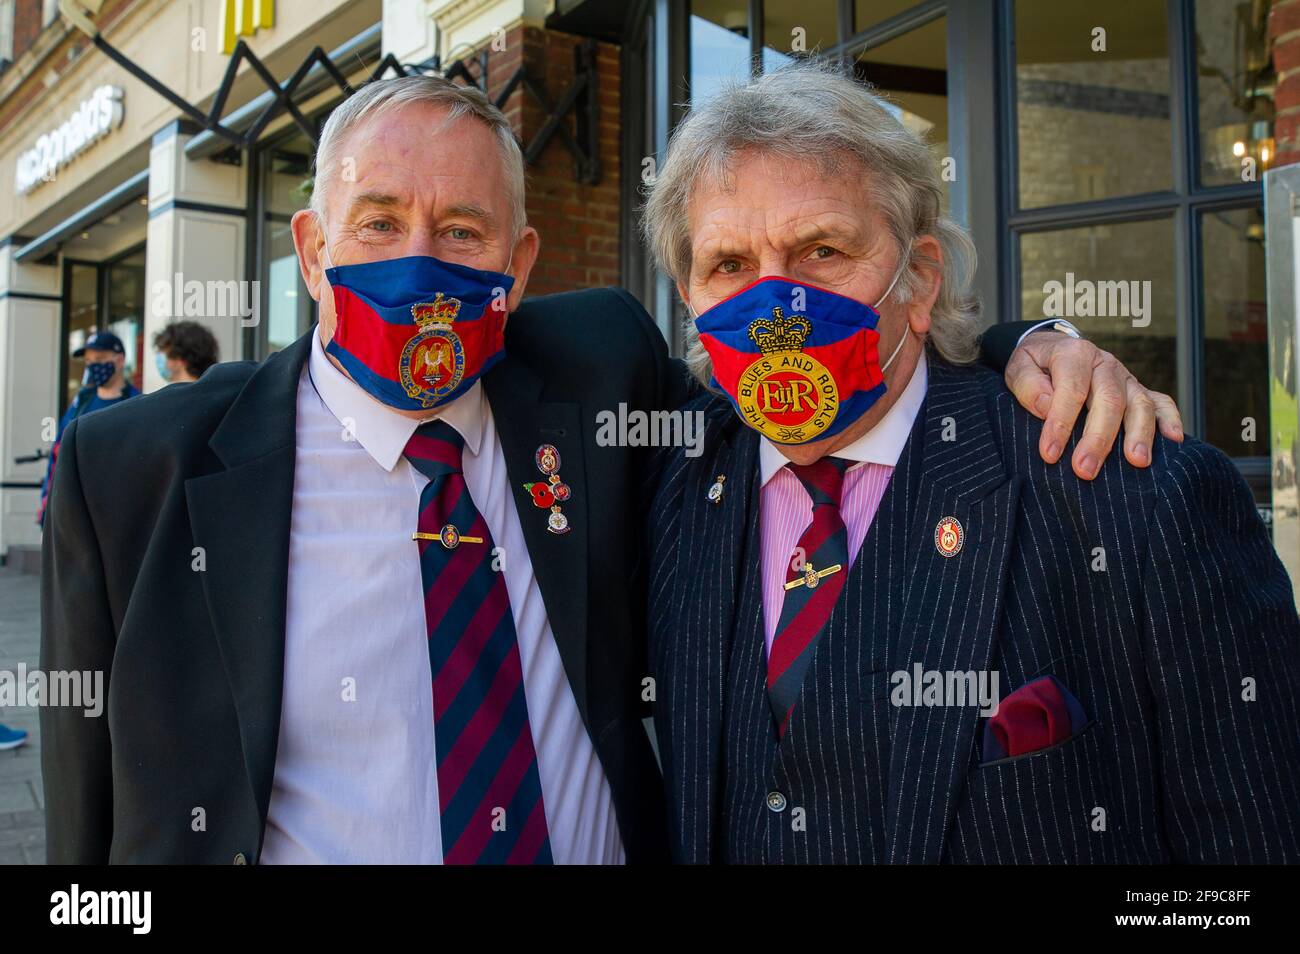 Windsor, Berkshire, UK. 17th April, 2021. Thomas Steven and Geoff York proudly wear their guard ties. Locals and visitors came into Windsor today to pay their respects to HRH Prince Philip on his funeral day, however, many heeded advice and stayed away due to the ongoing Covid-19 Pandemic. There was a heavy presence of armed police in the town together with numerous RBWM stewards. The funeral for the Duke of Edinburgh was a private event held at St George’s Chapel in the grounds of Windsor Castle. Credit: Maureen McLean/Alamy Live News Stock Photo